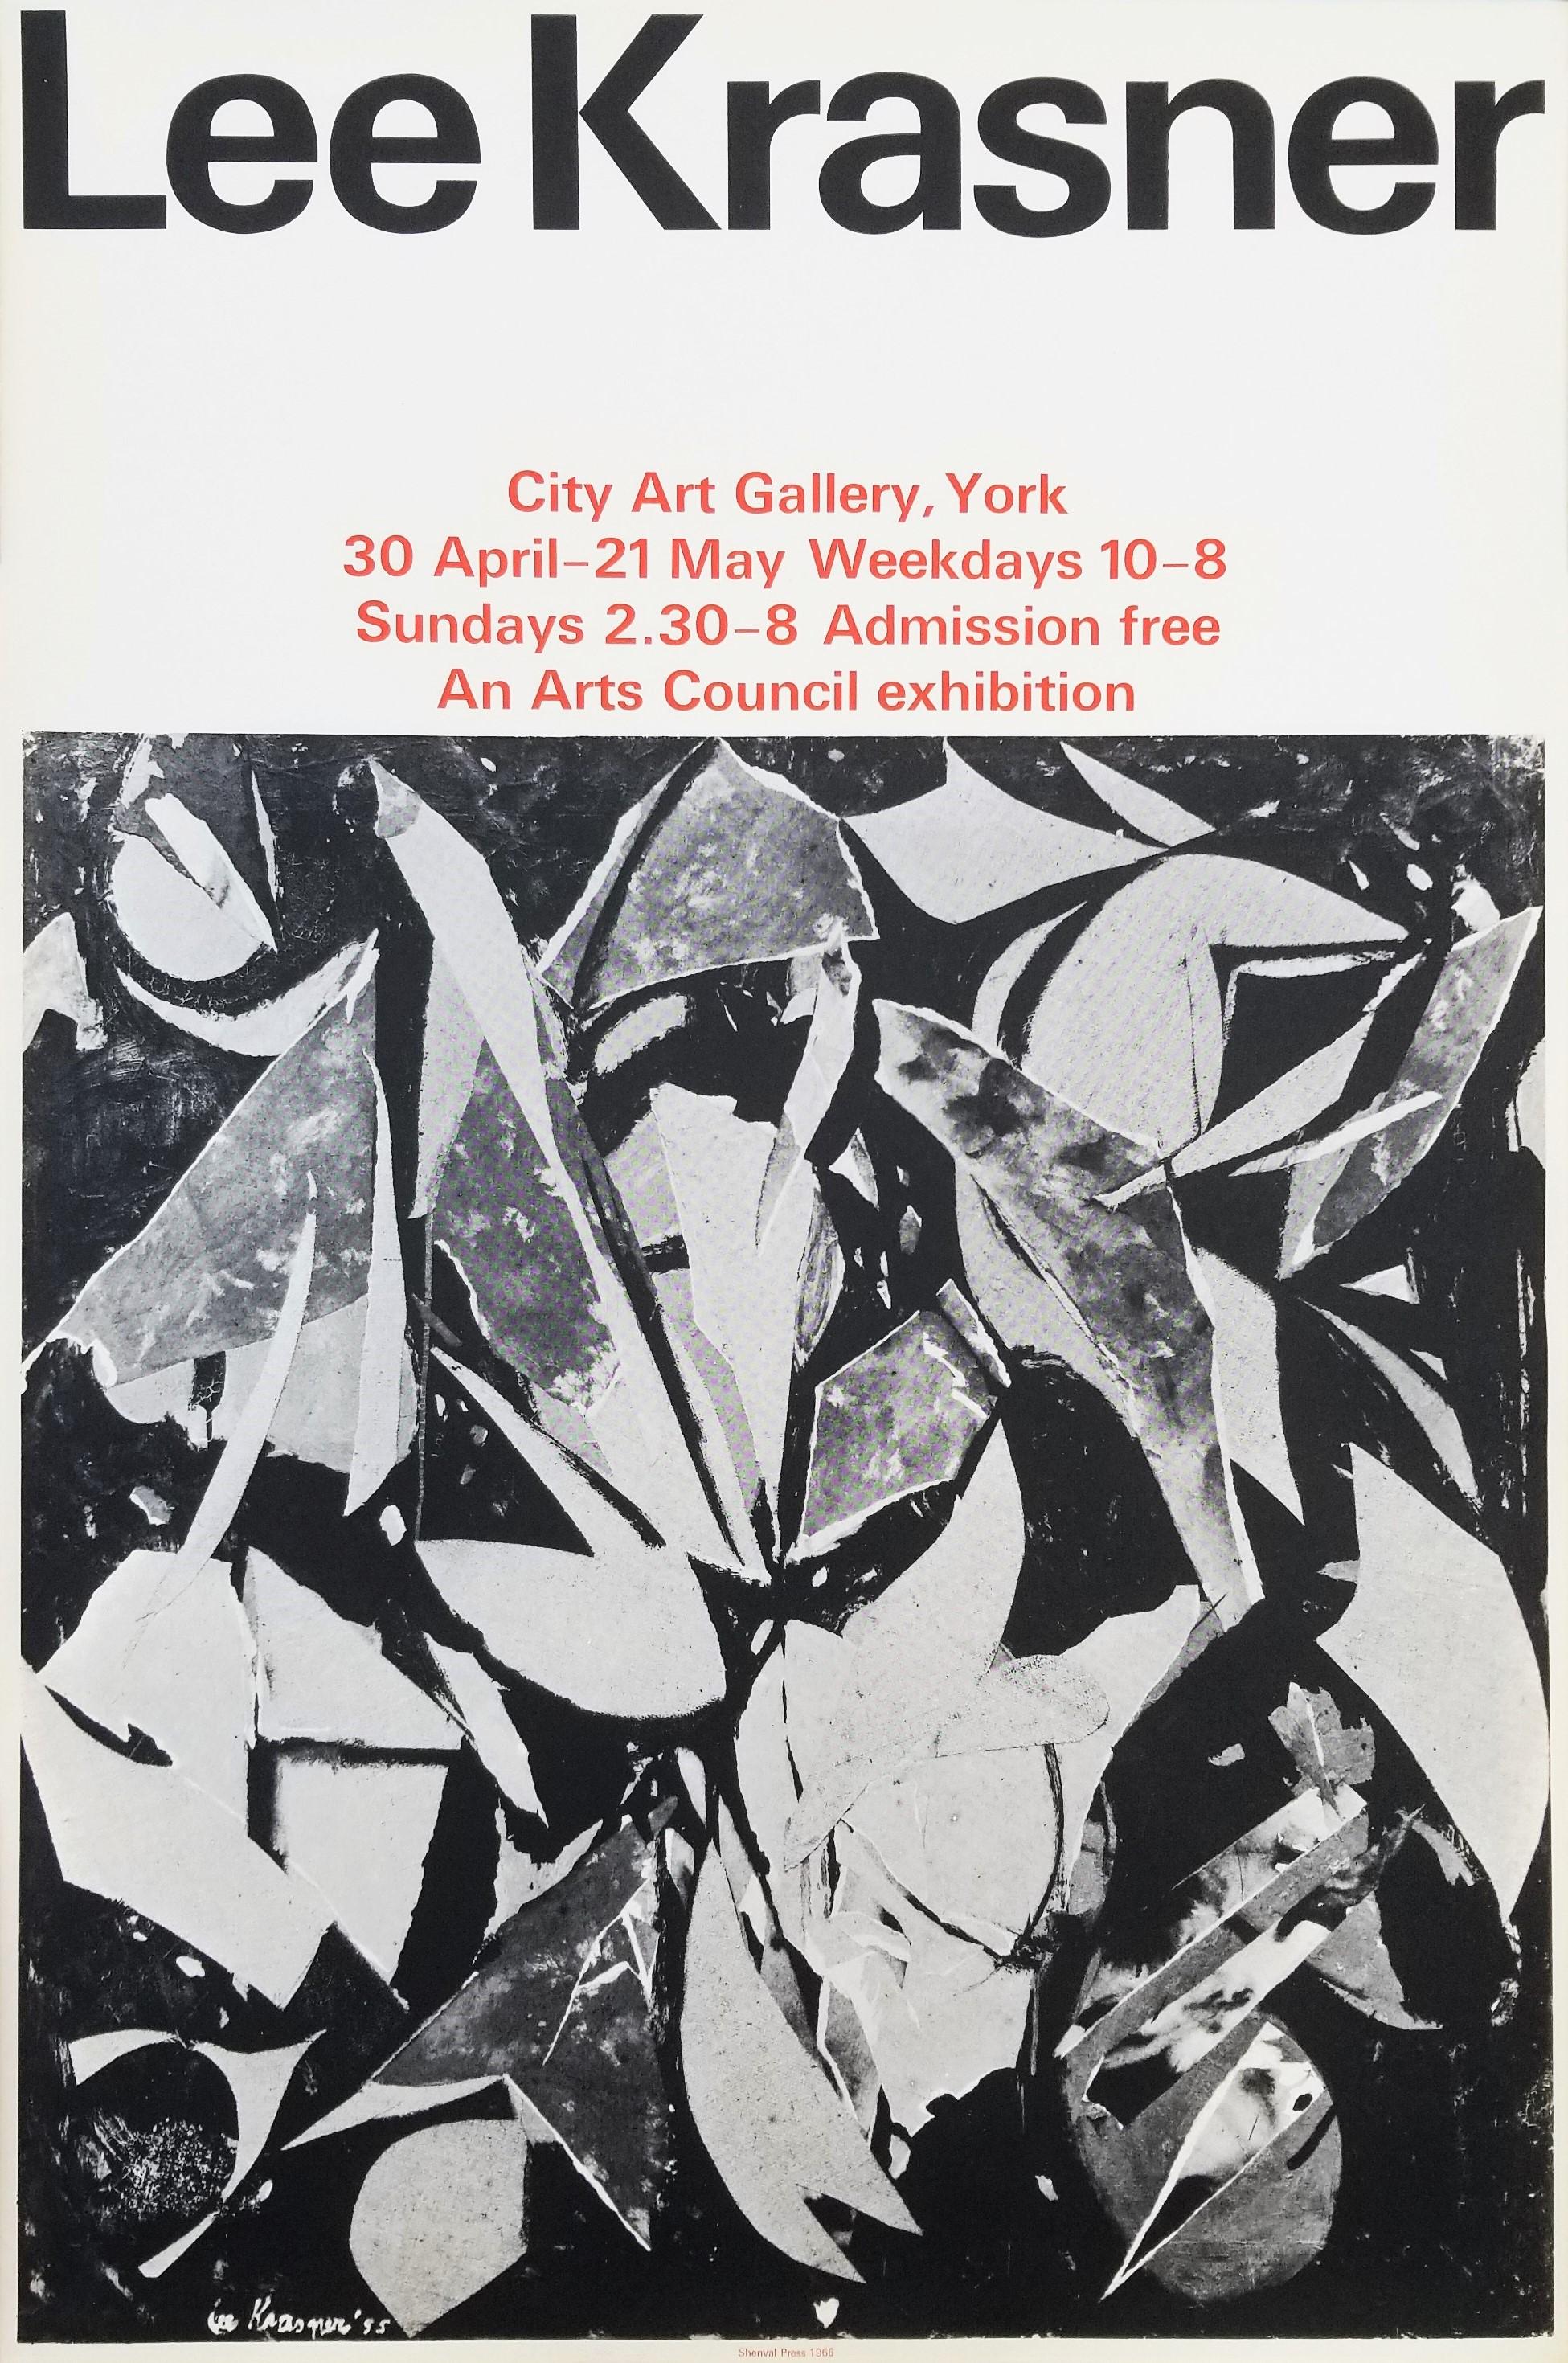 Artist: (after) Lee Krasner (American, 1908-1984)
Title: "City Art Gallery (Bird Talk)"
*Signed and dated by Krasner in the plate (printed signature) lower left
Year: 1966
Medium: Original Lithograph, Exhibition Poster on light wove paper
Limited